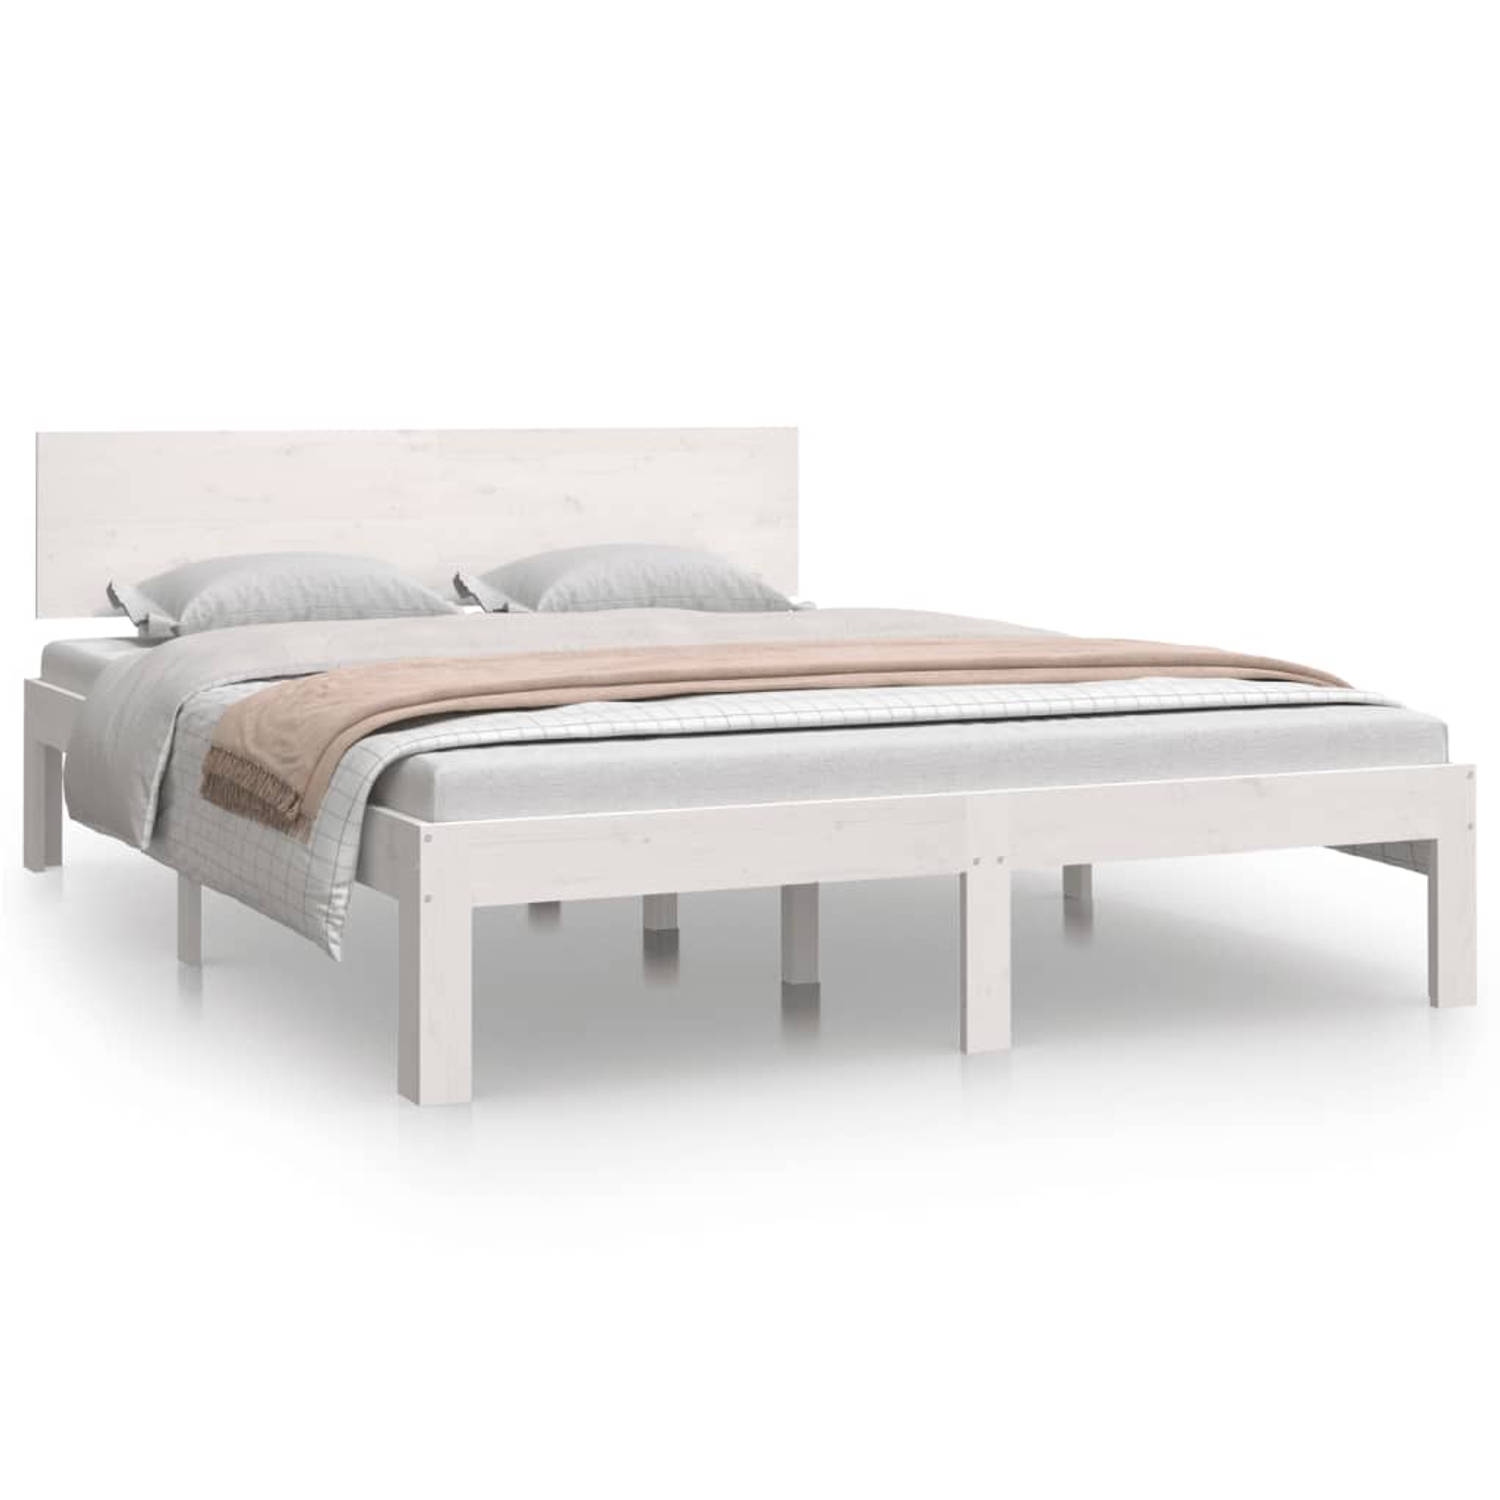 The Living Store Bedframe massief hout wit 150x200 cm 5FT King Size - Bedframe - Bedframes - Bed - Bedbodem - Ledikant - Bed Frame - Massief Houten Bedframe - Slaapmeubel - Bedden